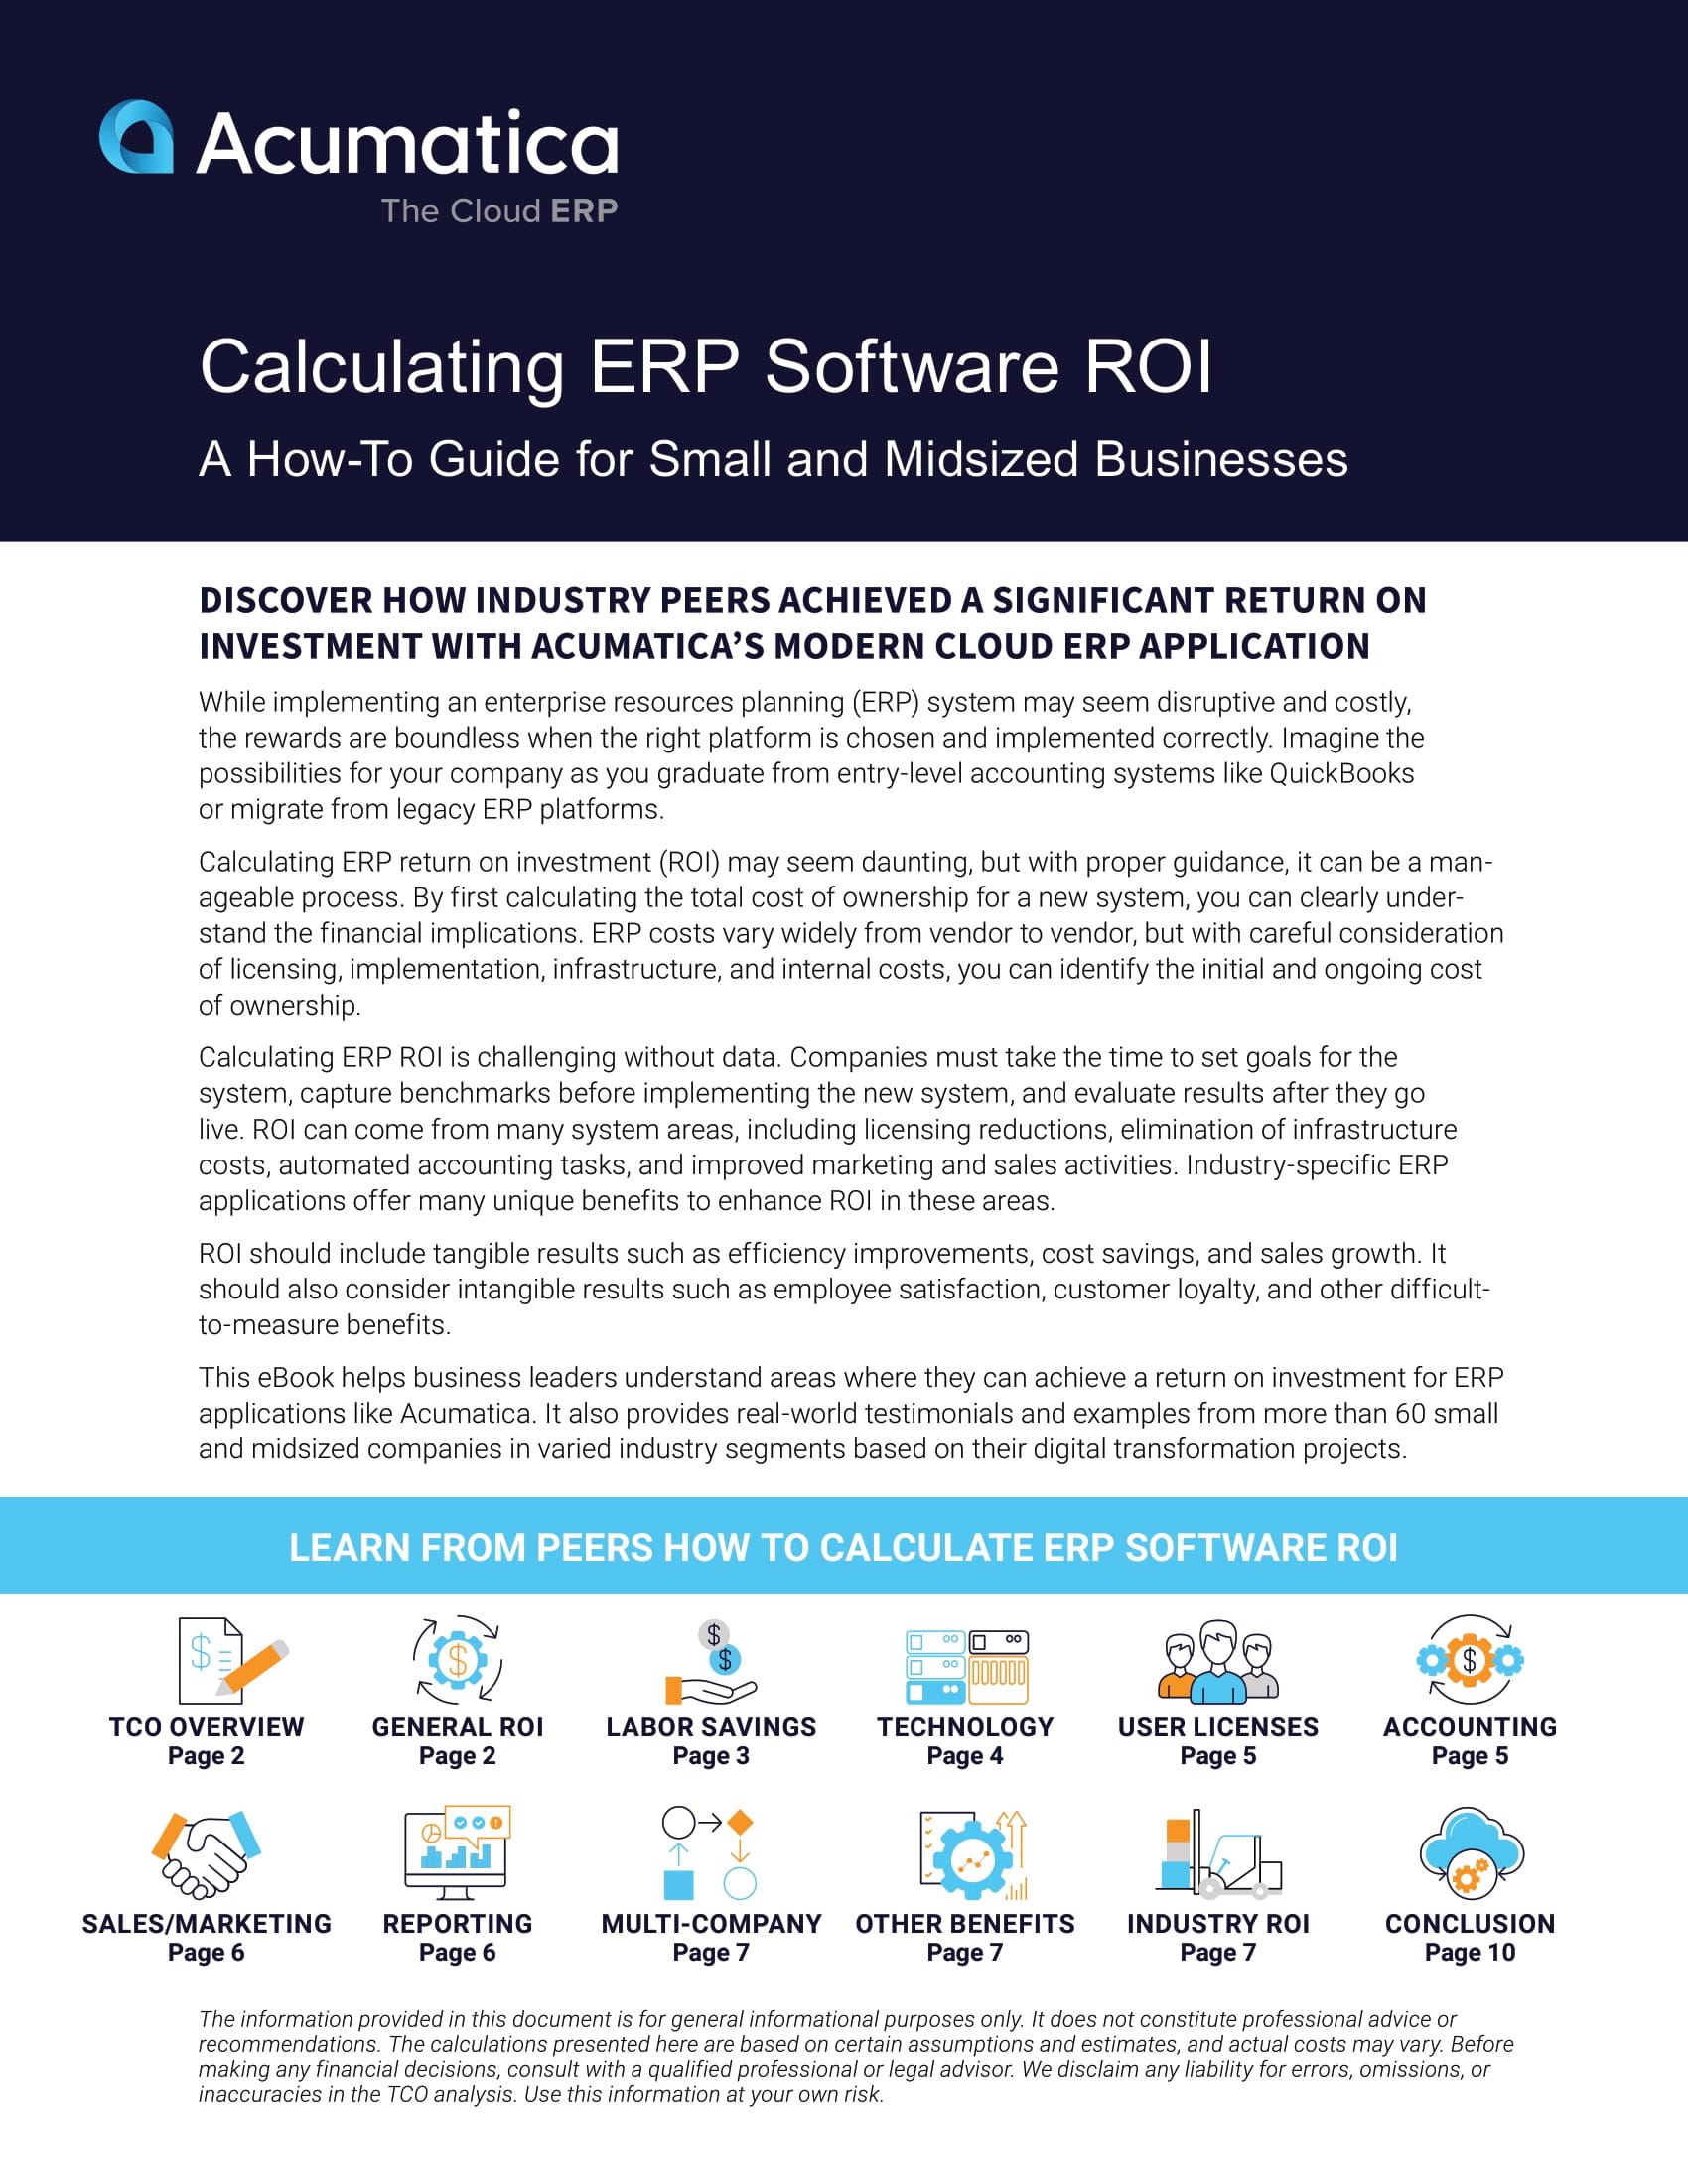 How to Calculate ERP Software Return on Investment (ROI)